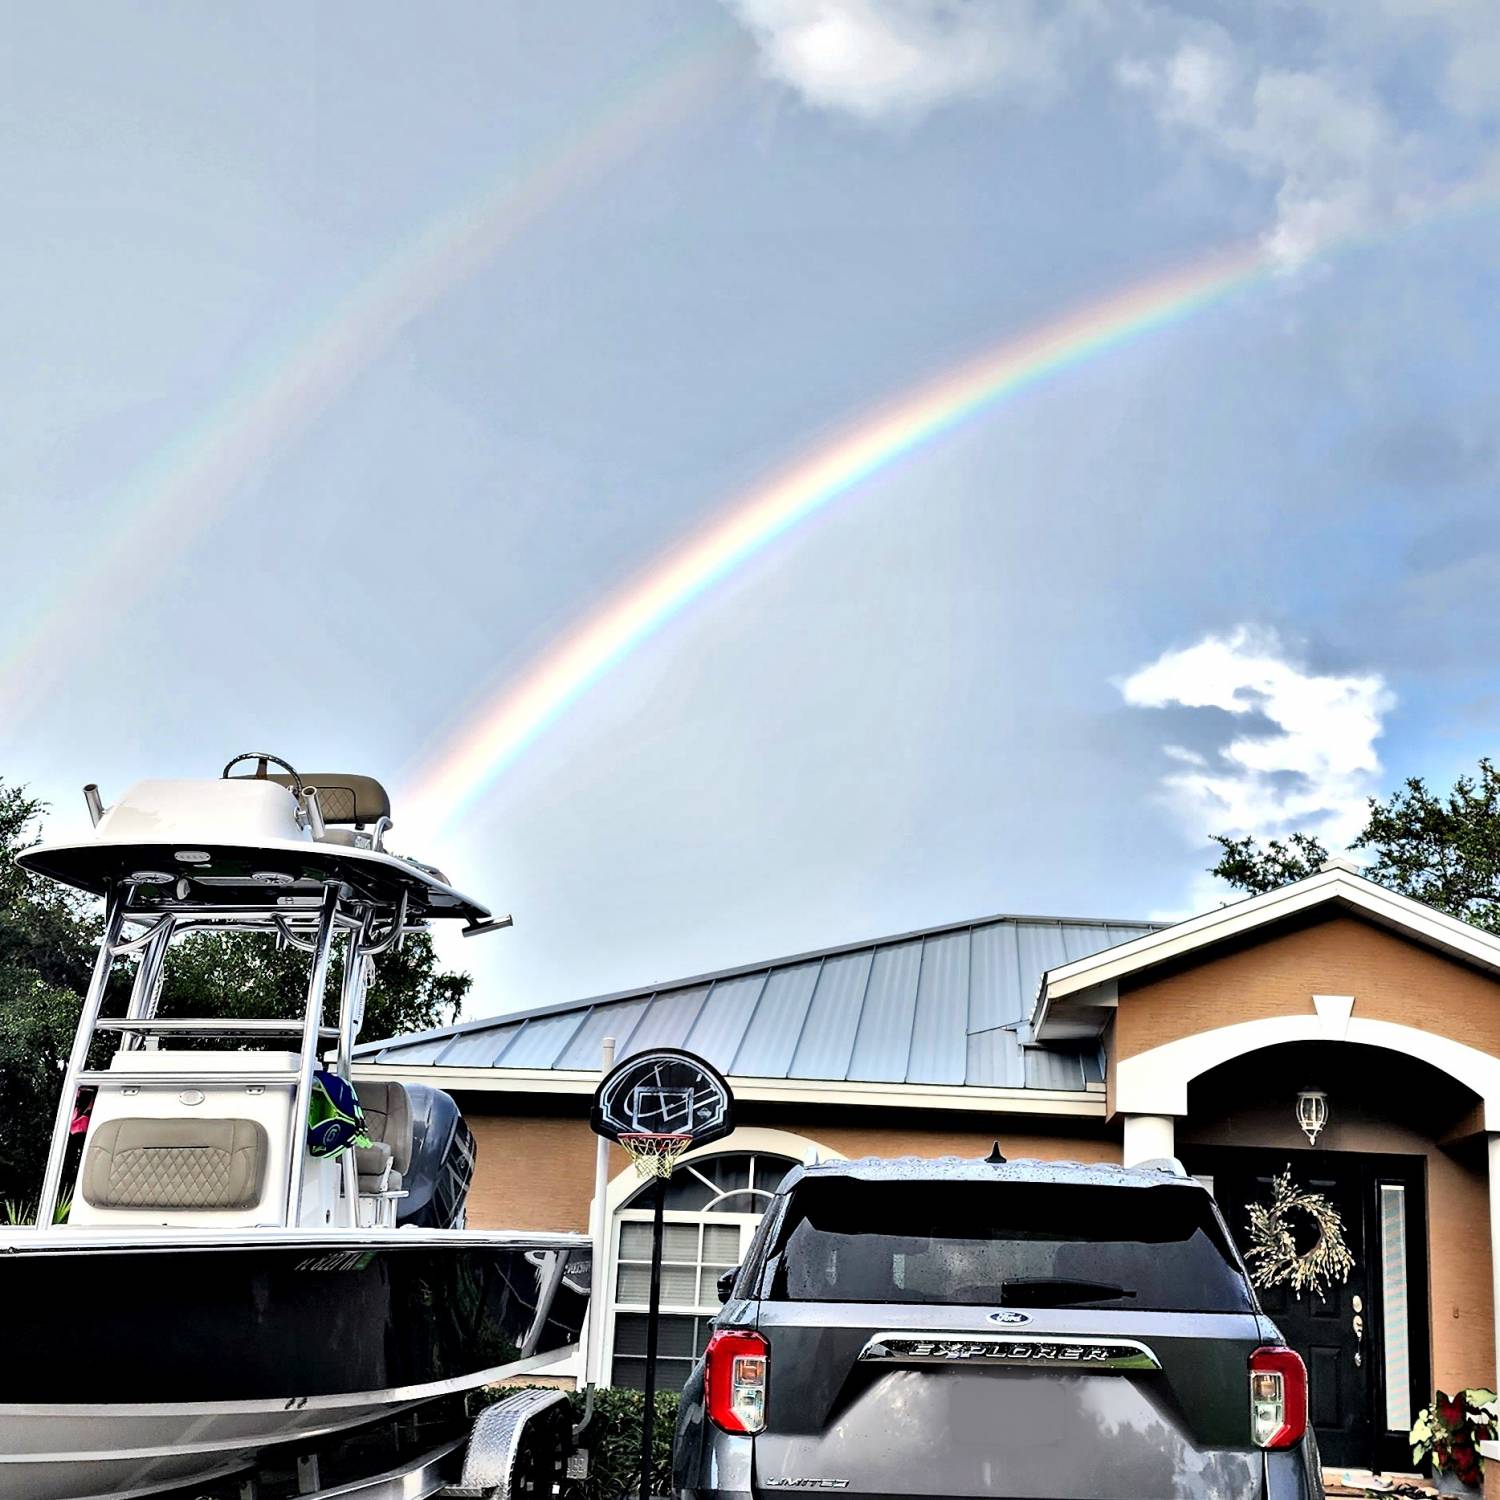 Title: Found what is at the end if the rainbow! - On board their Sportsman Masters 247OE Bay Boat - Location: Lake placid. Participating in the Photo Contest #SportsmanJuly